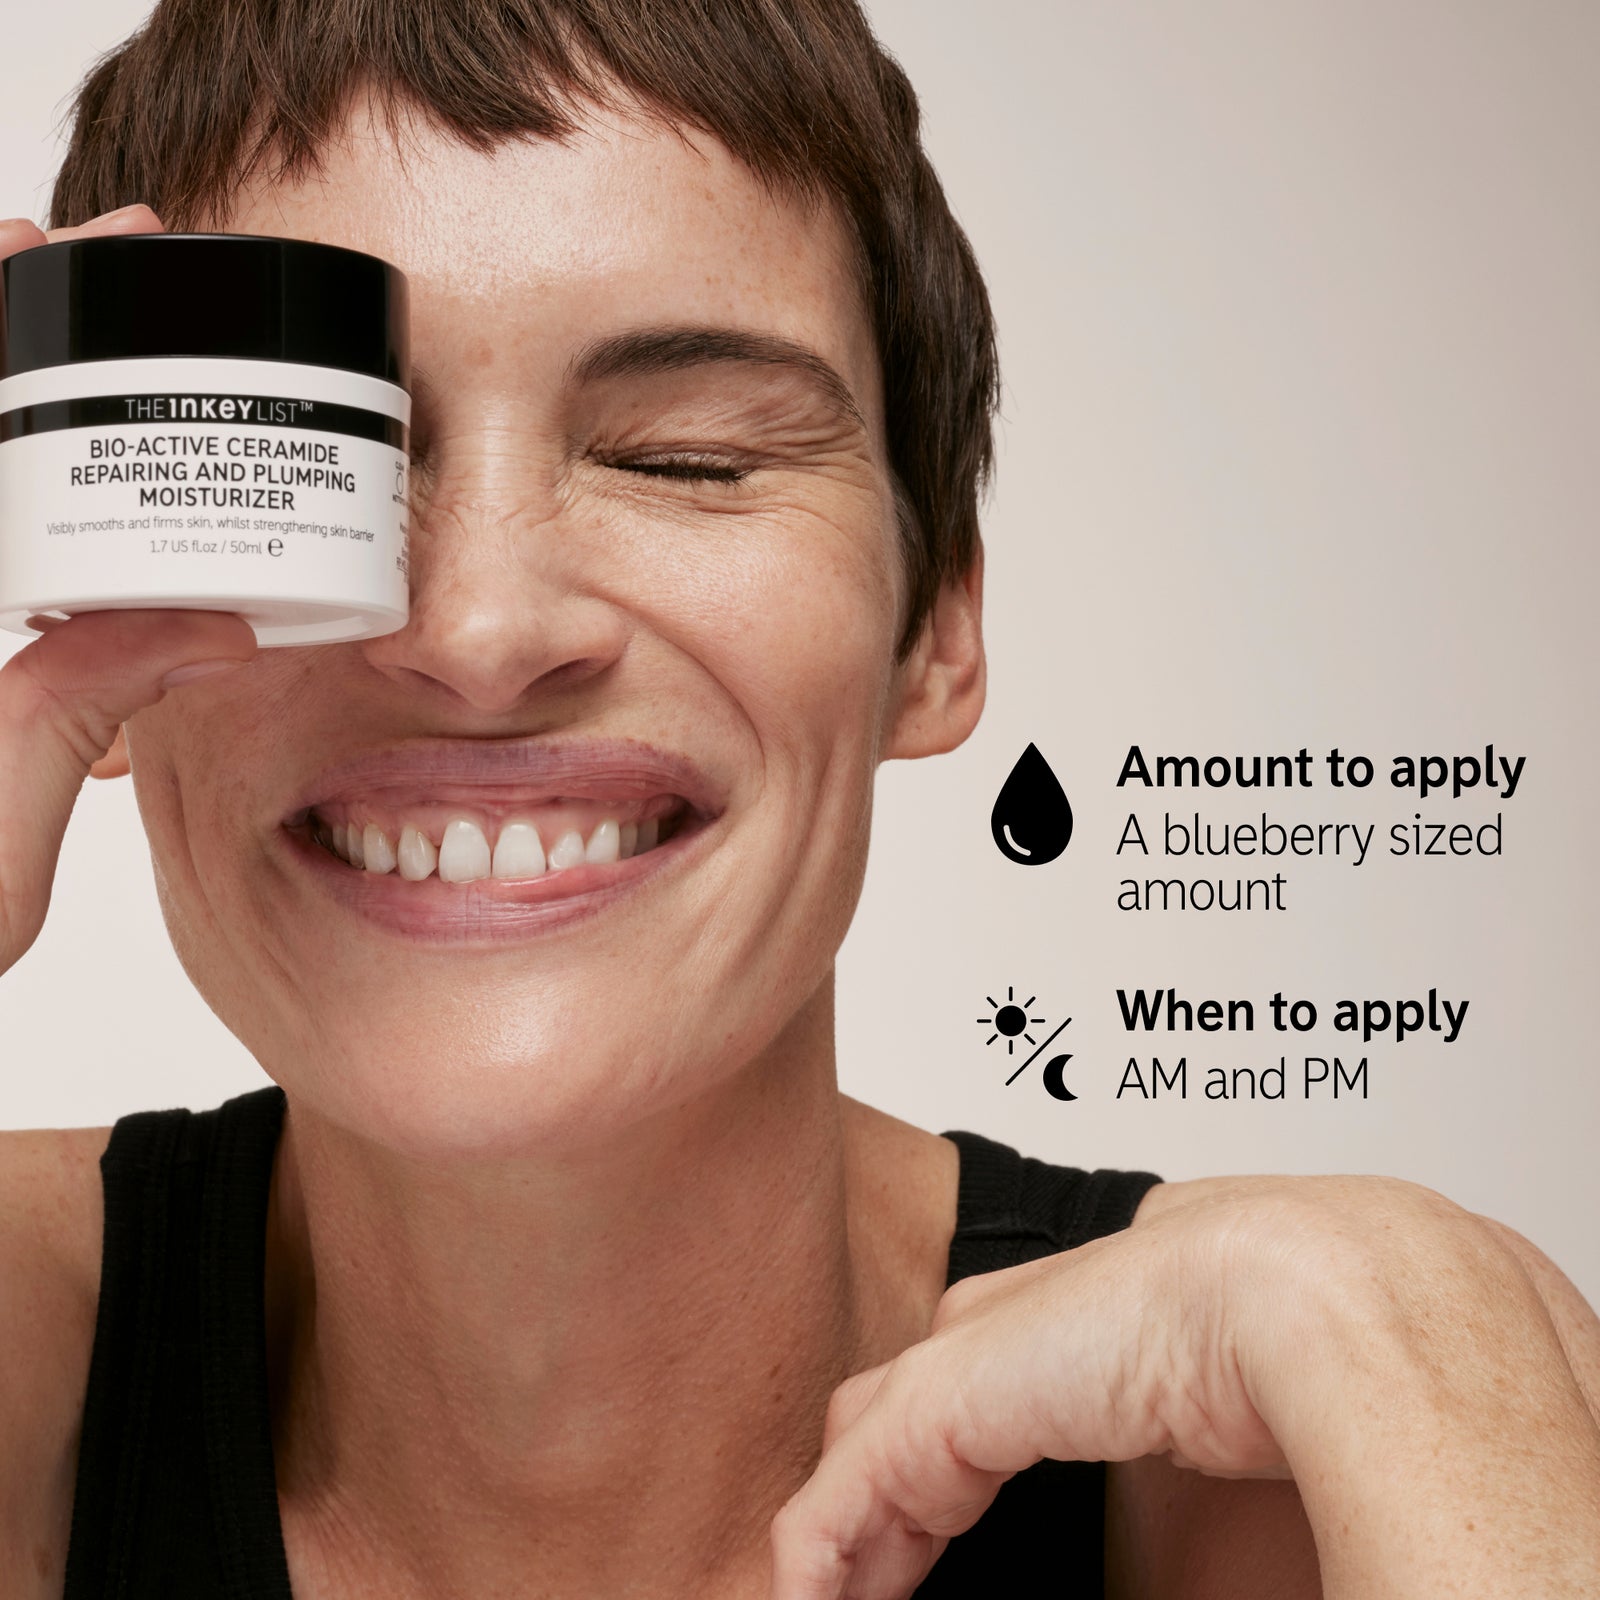 Model holding moisturizer with text: 